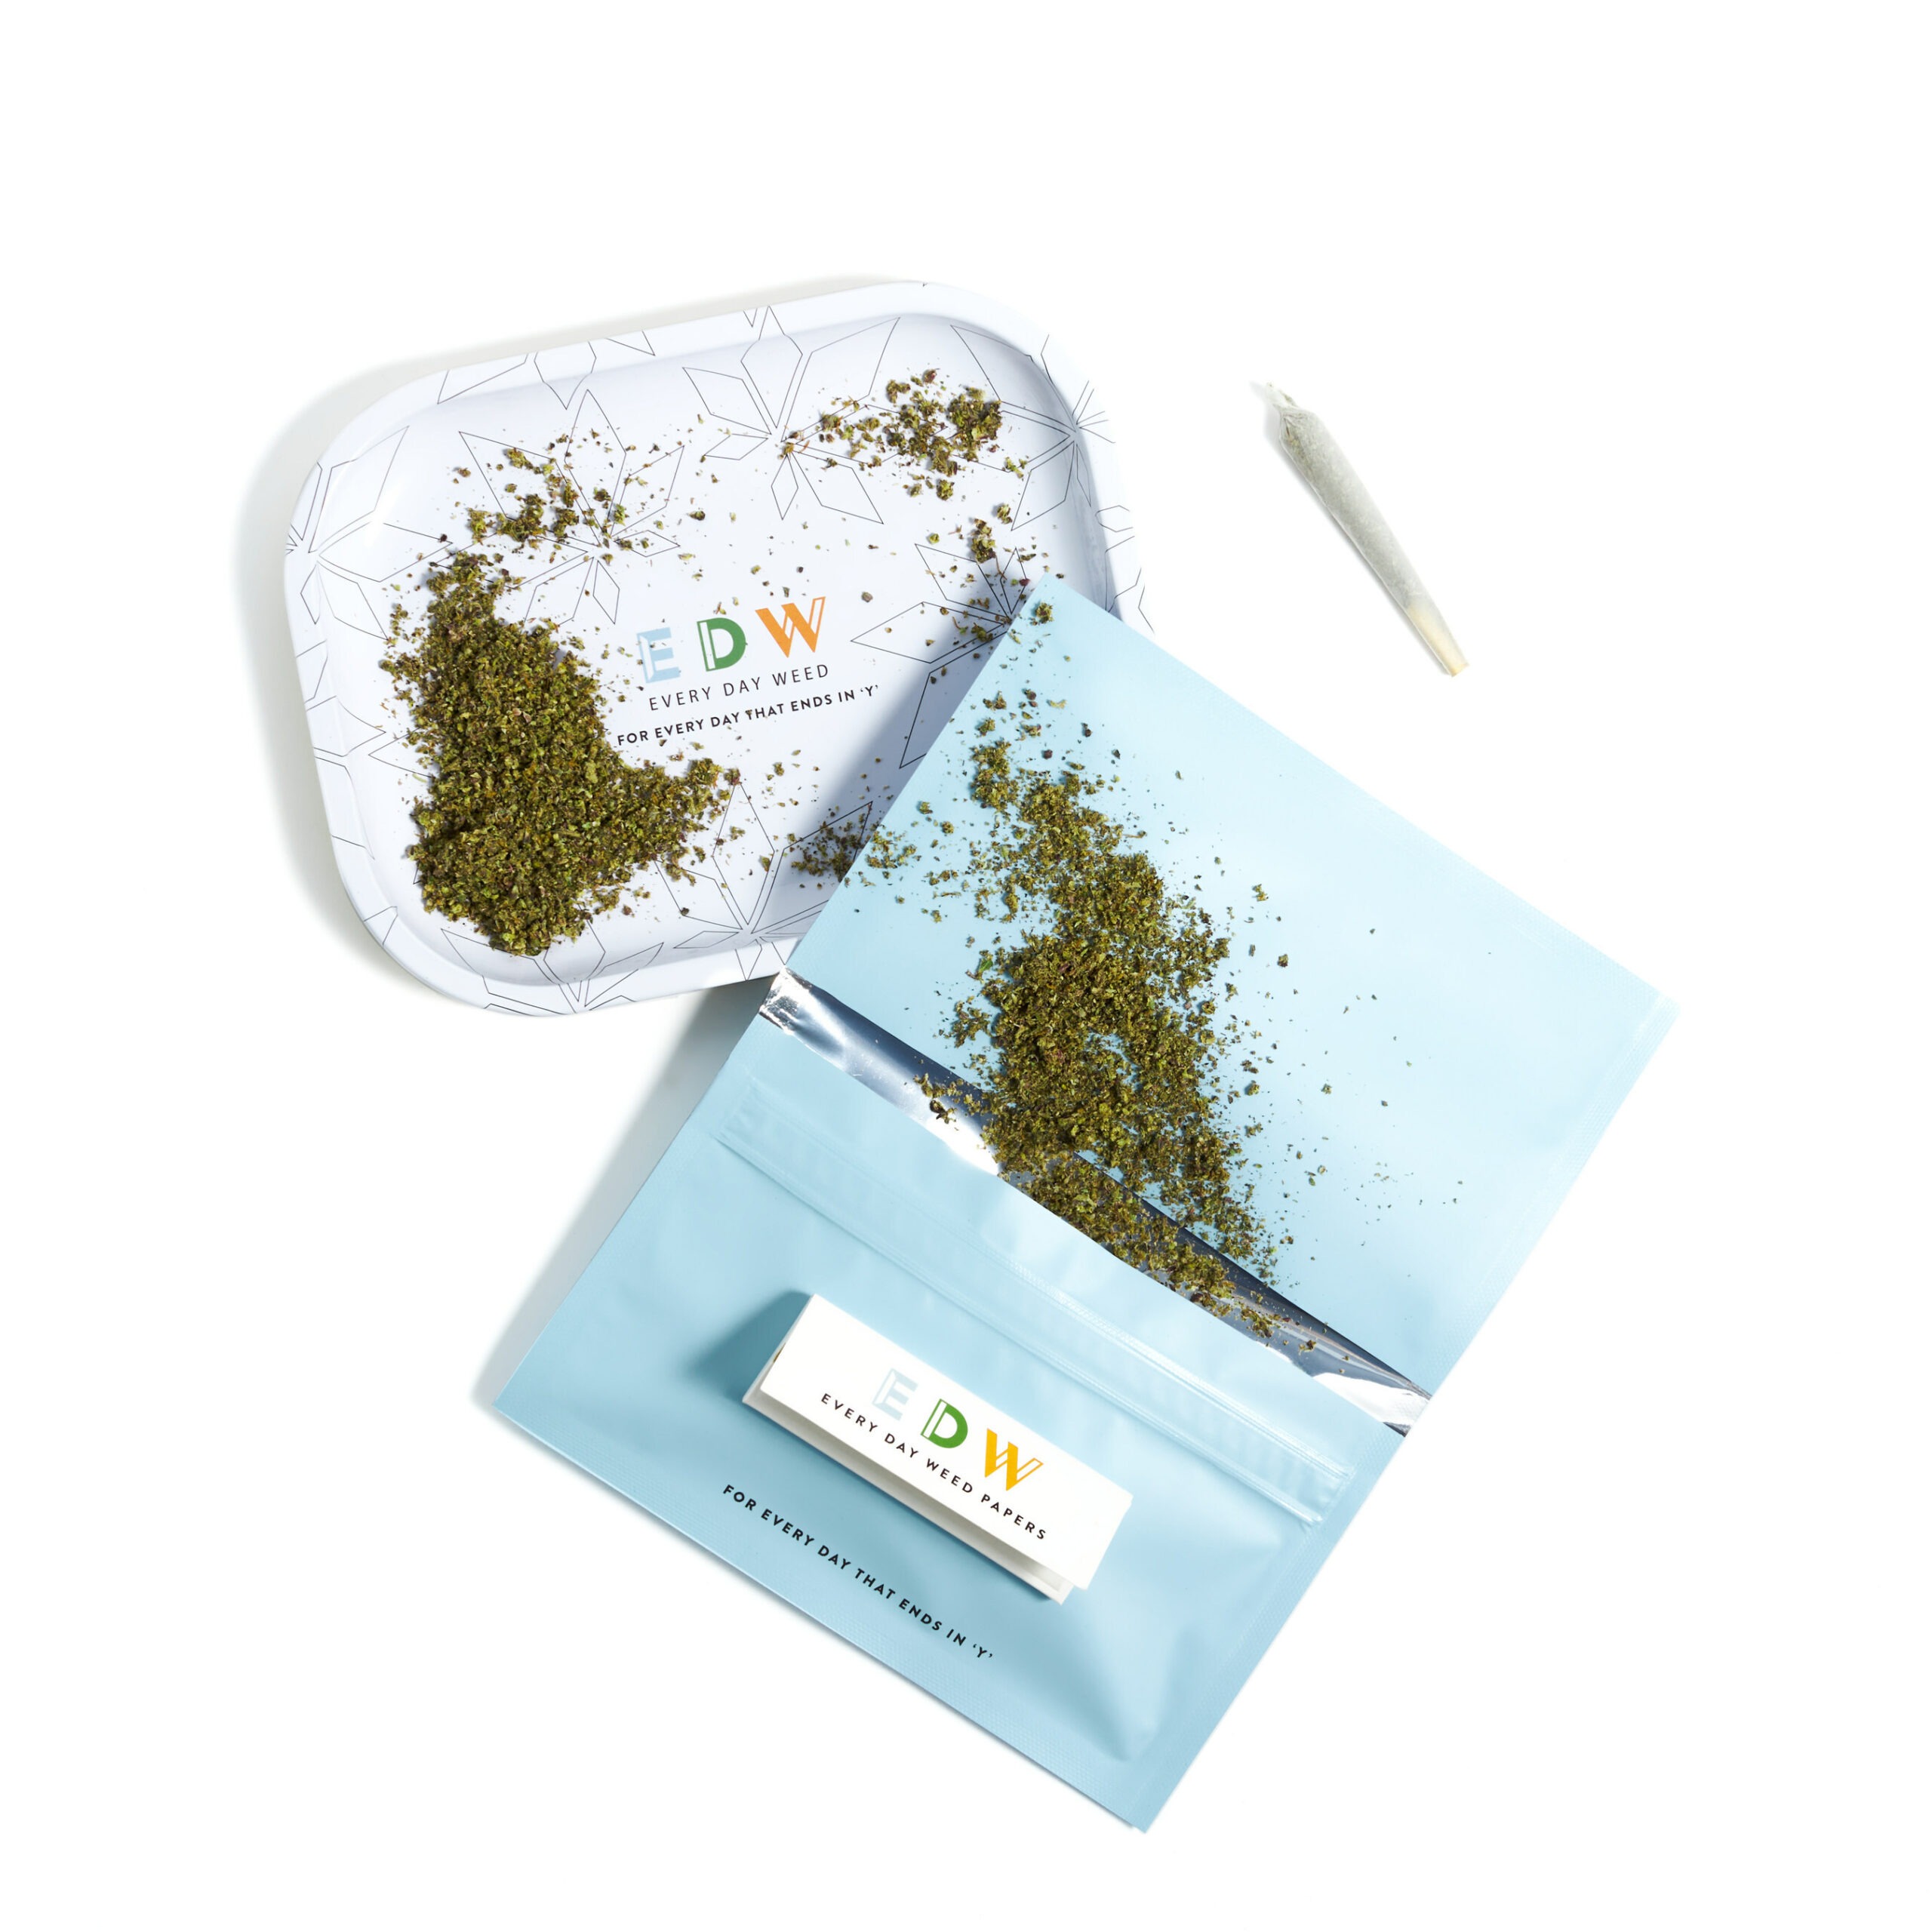 SCHWAZZE LAUNCHES EDW – A NEW READY-TO-ROLL, HALF OUNCE PRE-GROUND FLOWER PRODUCT